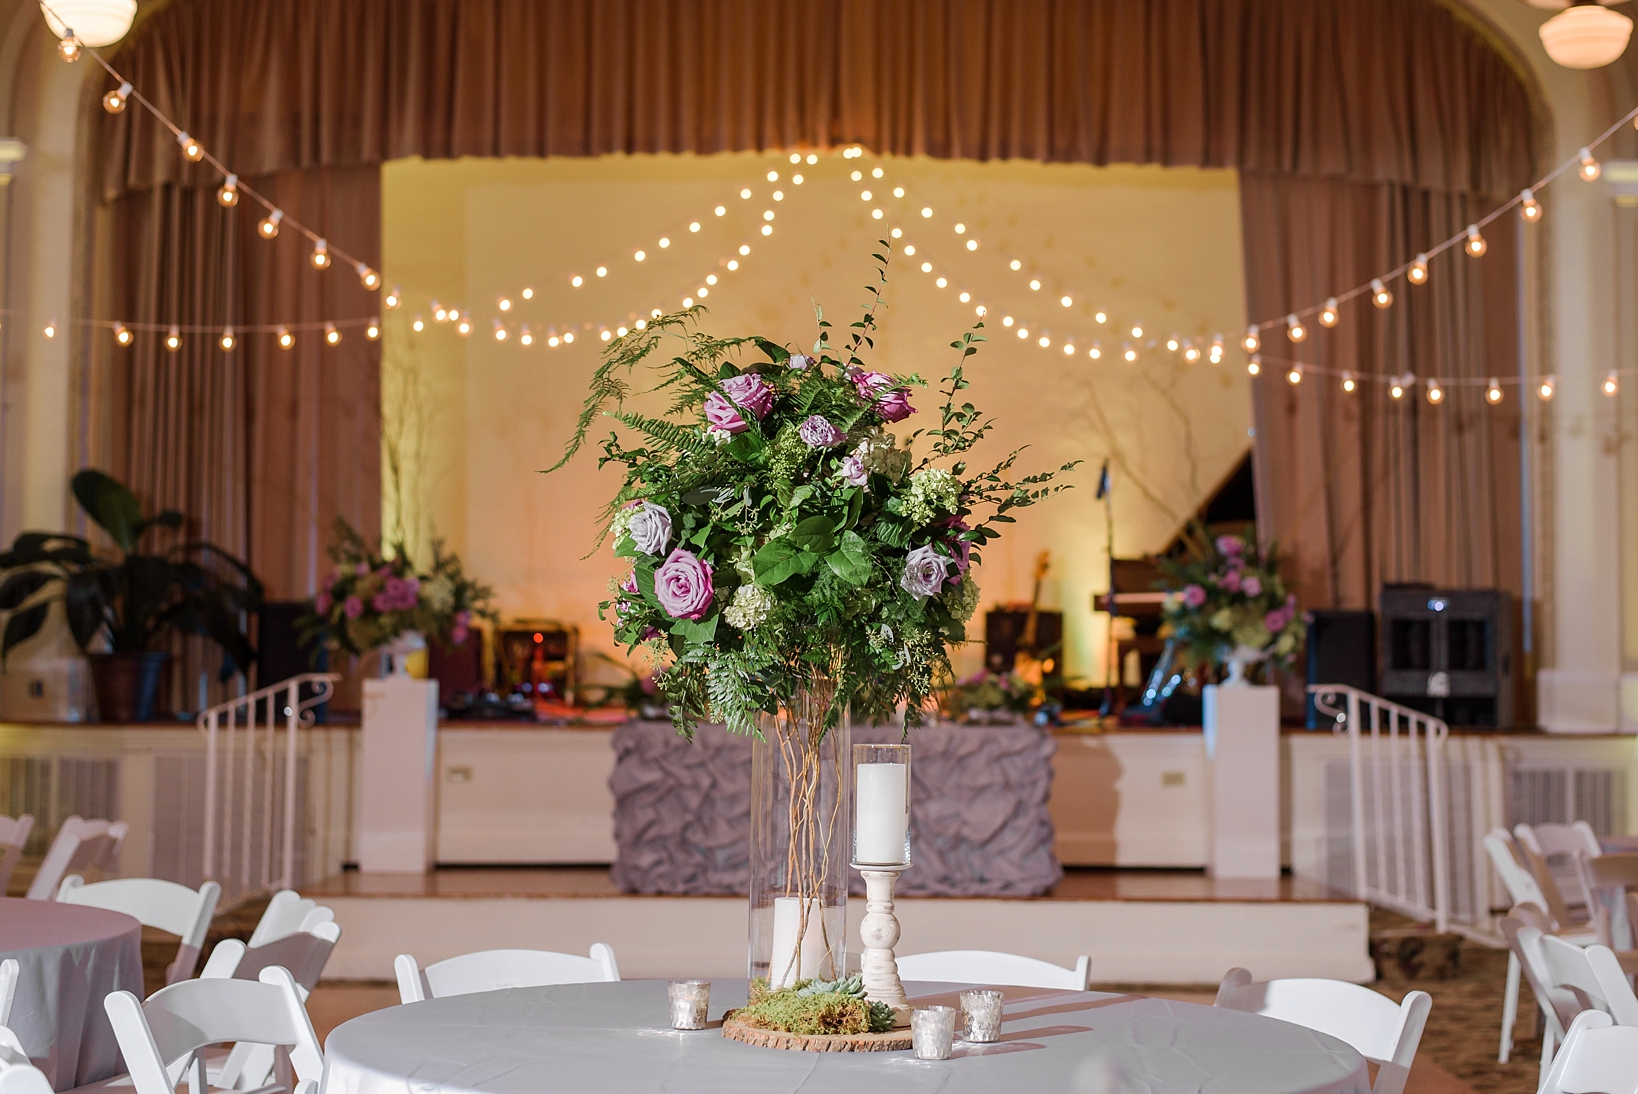 Reception details with string lights and floral centerpieces